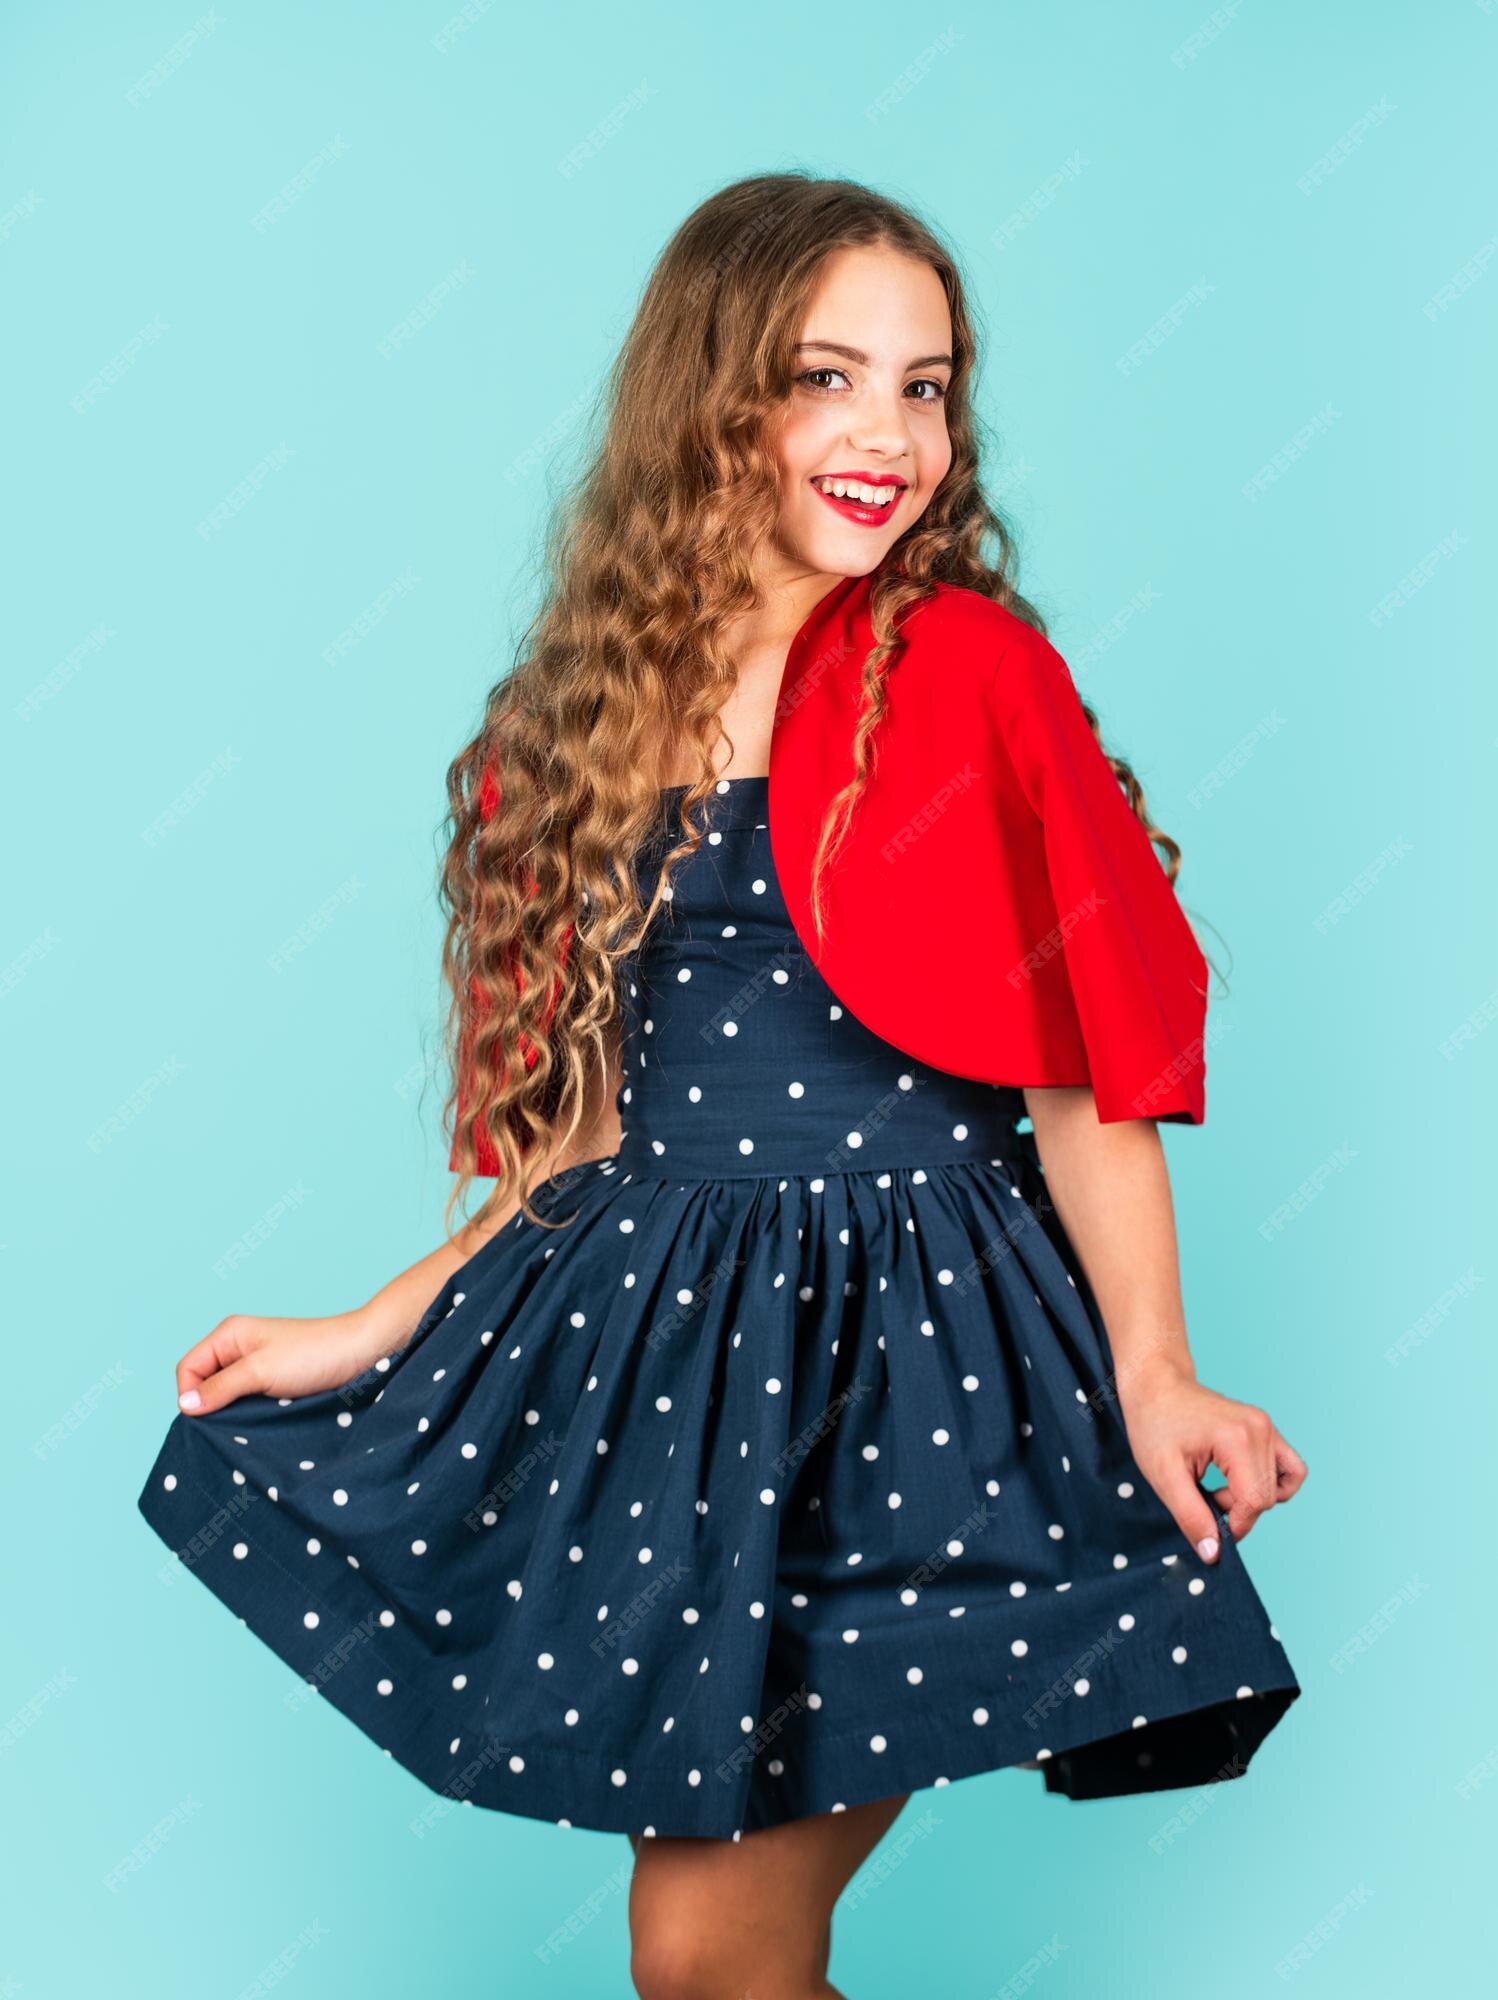 Premium Photo | Shiny wavy hair elegant retro kid vintage fashion for kid  pretty child long curly hair small girl makeup beauty in dress little lady  in pinup style glamour lifestyle small